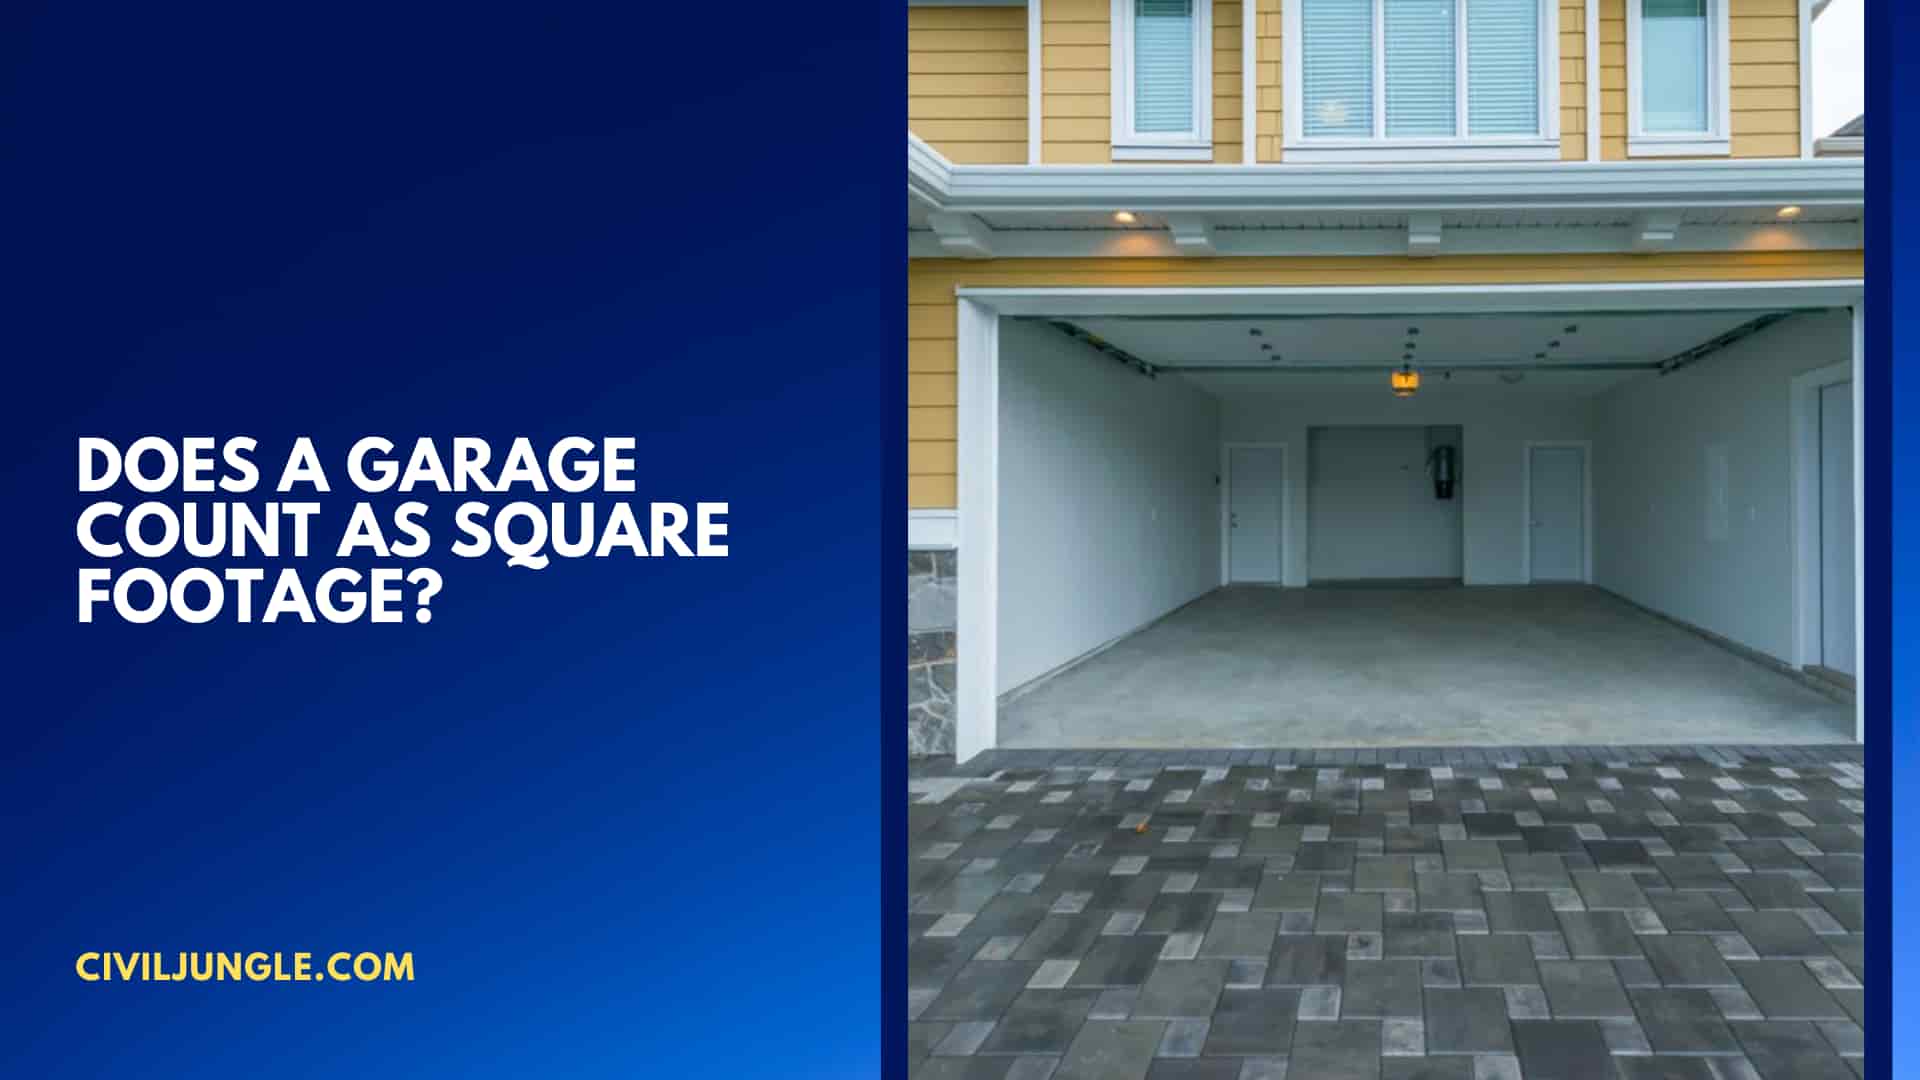 Does a Garage Count as Square Footage?